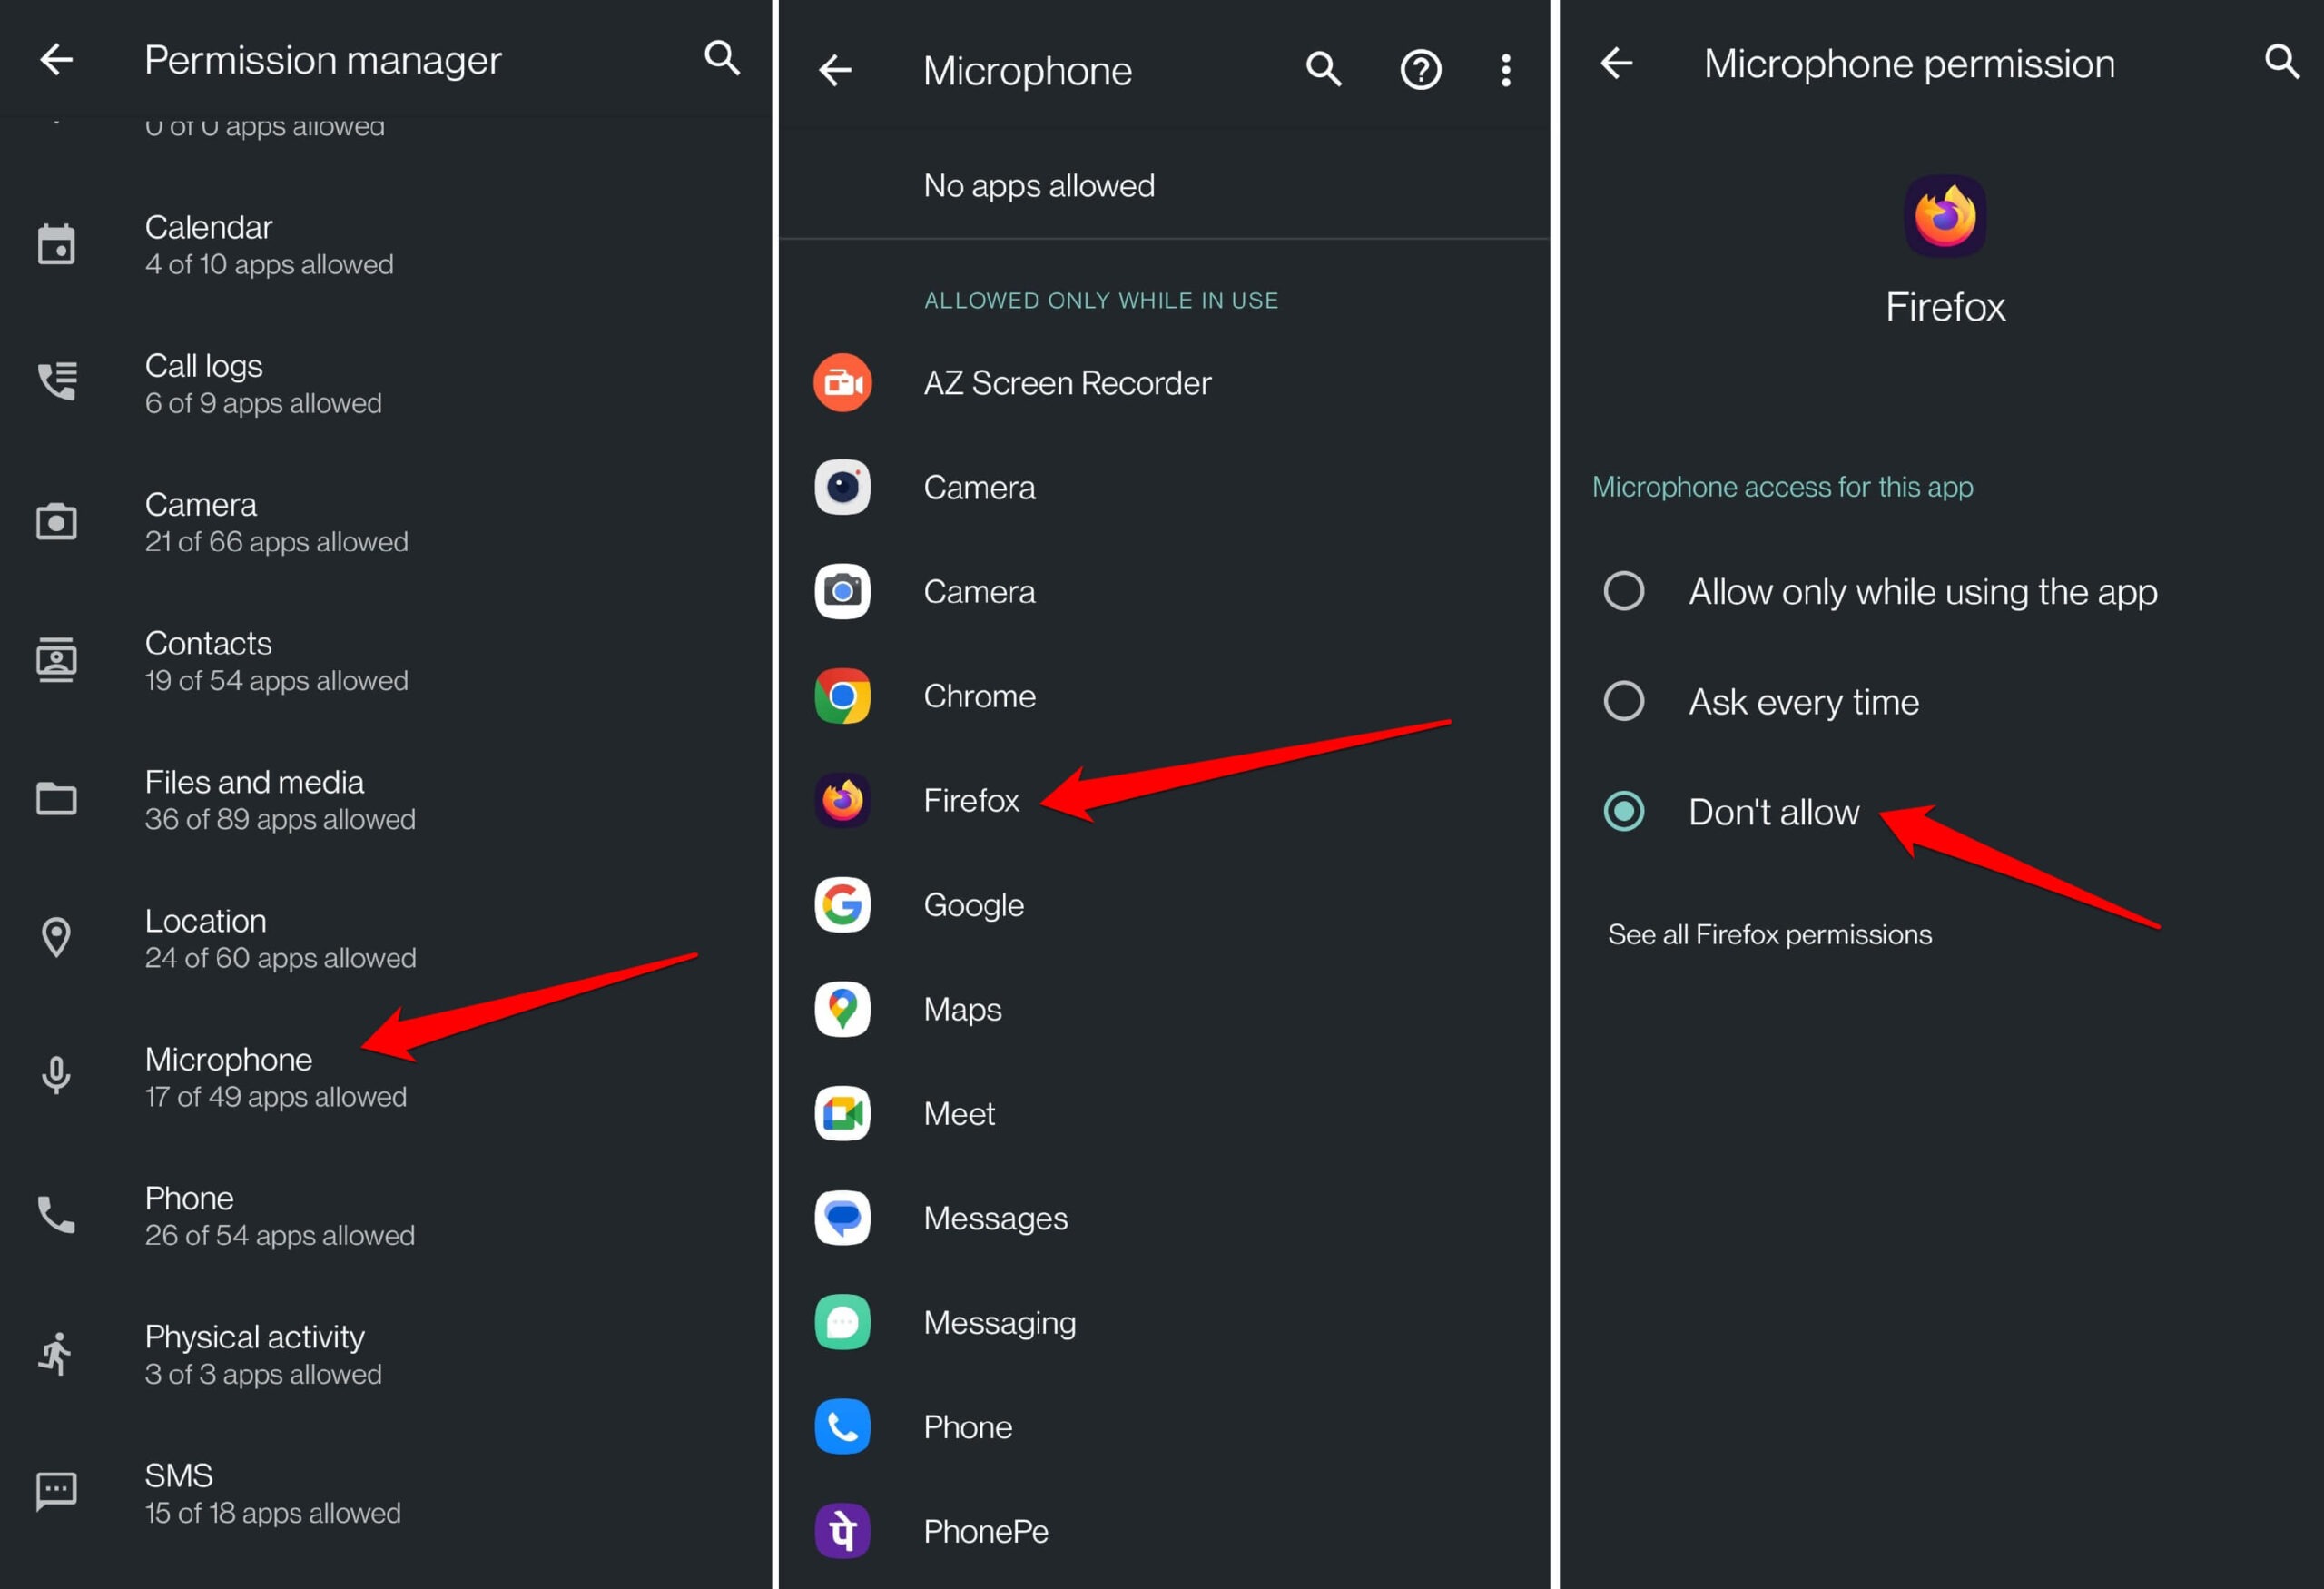 disable-Firefox-microphone access from Android settings